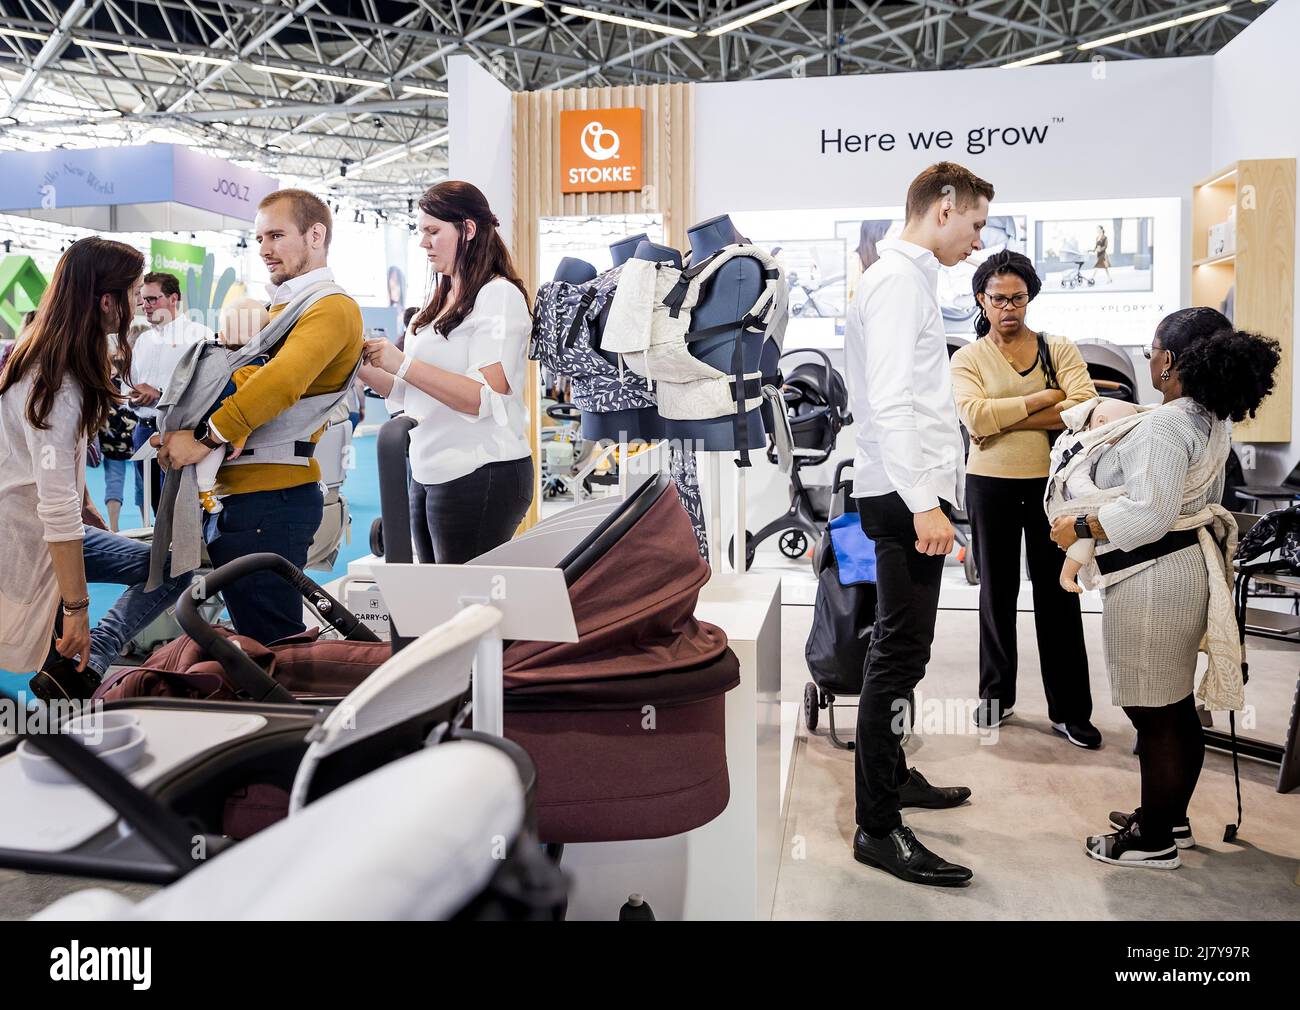 2022-05-11 15:24:20 AMSTERDAM - Visitors test baby carriers on the first day of the Nine Months Fair in the RAI. It is the first time since the outbreak of the corona pandemic that the fair on pregnancy and babies is taking place again. REMKO DE WAAL netherlands out - belgium out Stock Photo